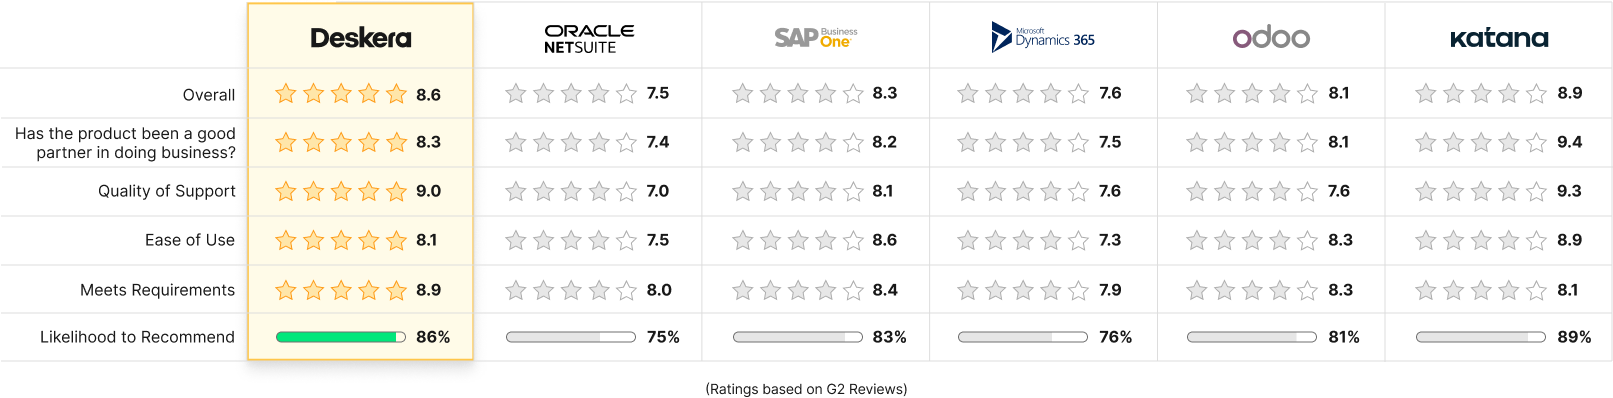 Rating Chart of different ERP systems based on various reviews